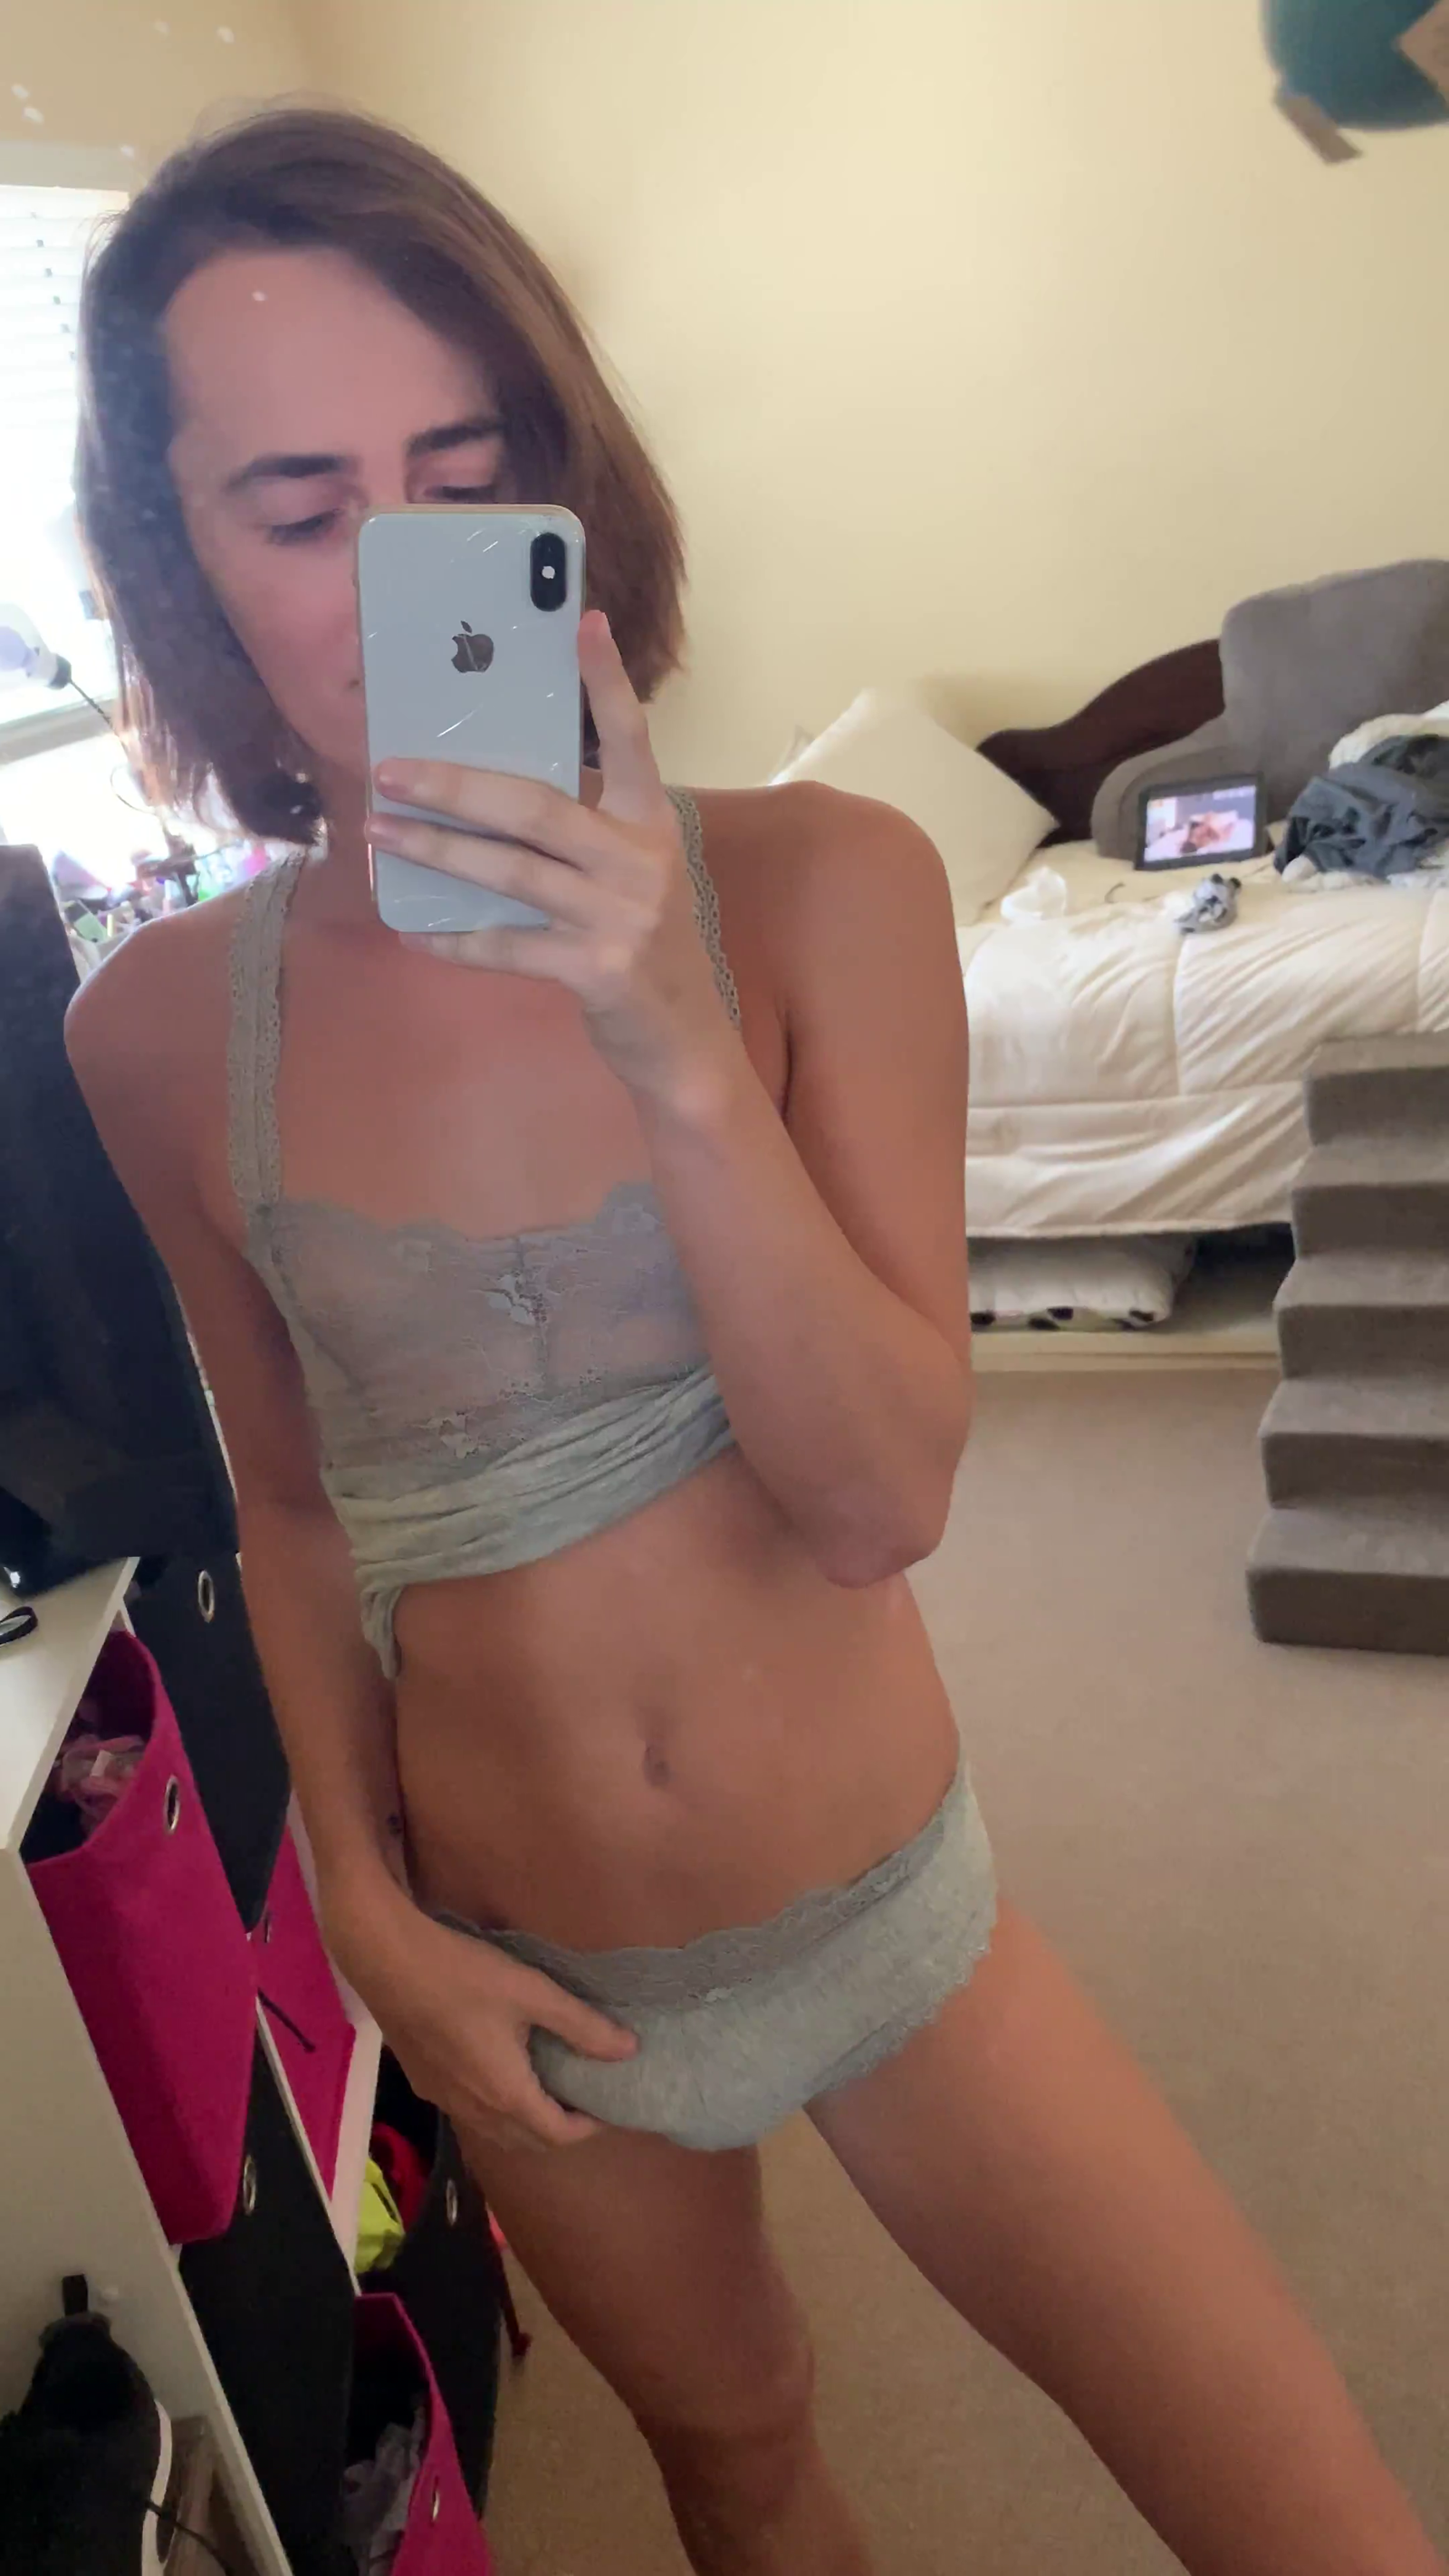 Video by Aimee with the username @AimeeTison,  May 8, 2020 at 5:14 PM. The post is about the topic Aimee's Archive and the text says 'Taylor Weaver #TaylorWeaver #hotasfuck #perfectboobs #panties #bra #cuteclitty 
https://gfycat.com/handmadeclutteredhoneyeater'